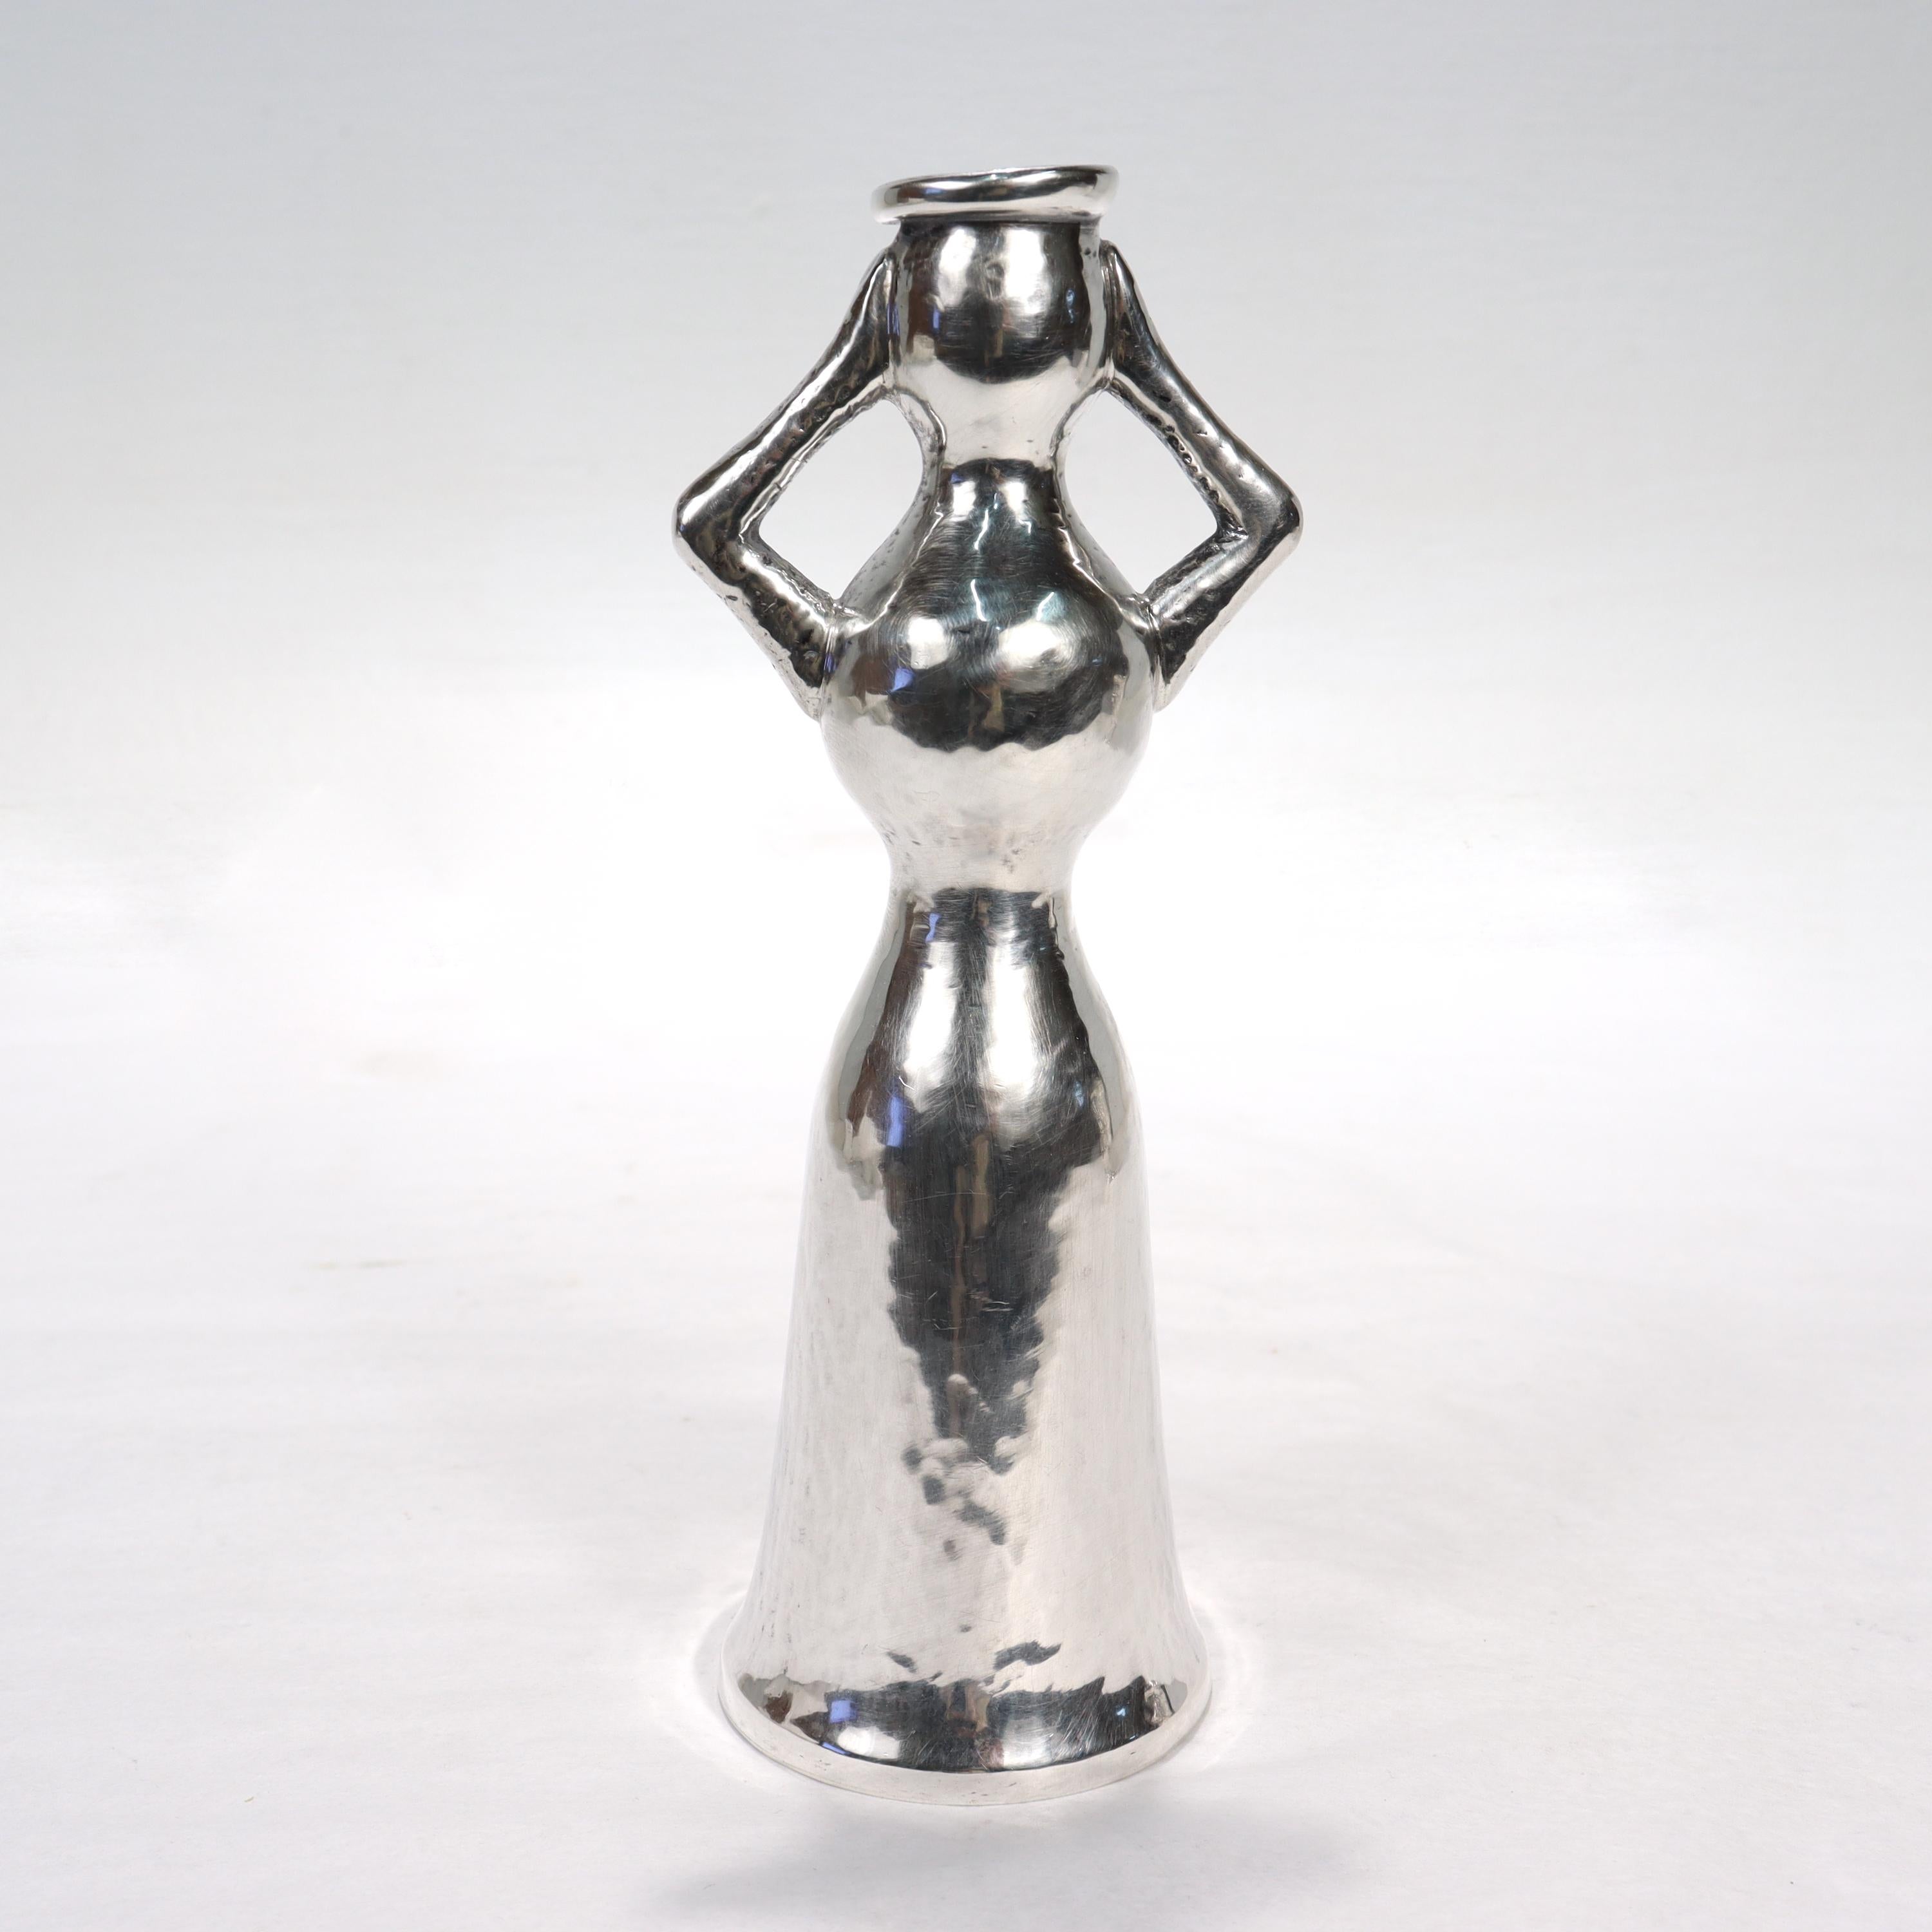 A fine vintage Lalounis vase.

In sterling silver. 

(It can also double as a candlestick.)

In the stylized form of a woman (an homage to archaic Greek fertility forms) with arms supporting the vase opening or candle cup and beautiful hand-hammered